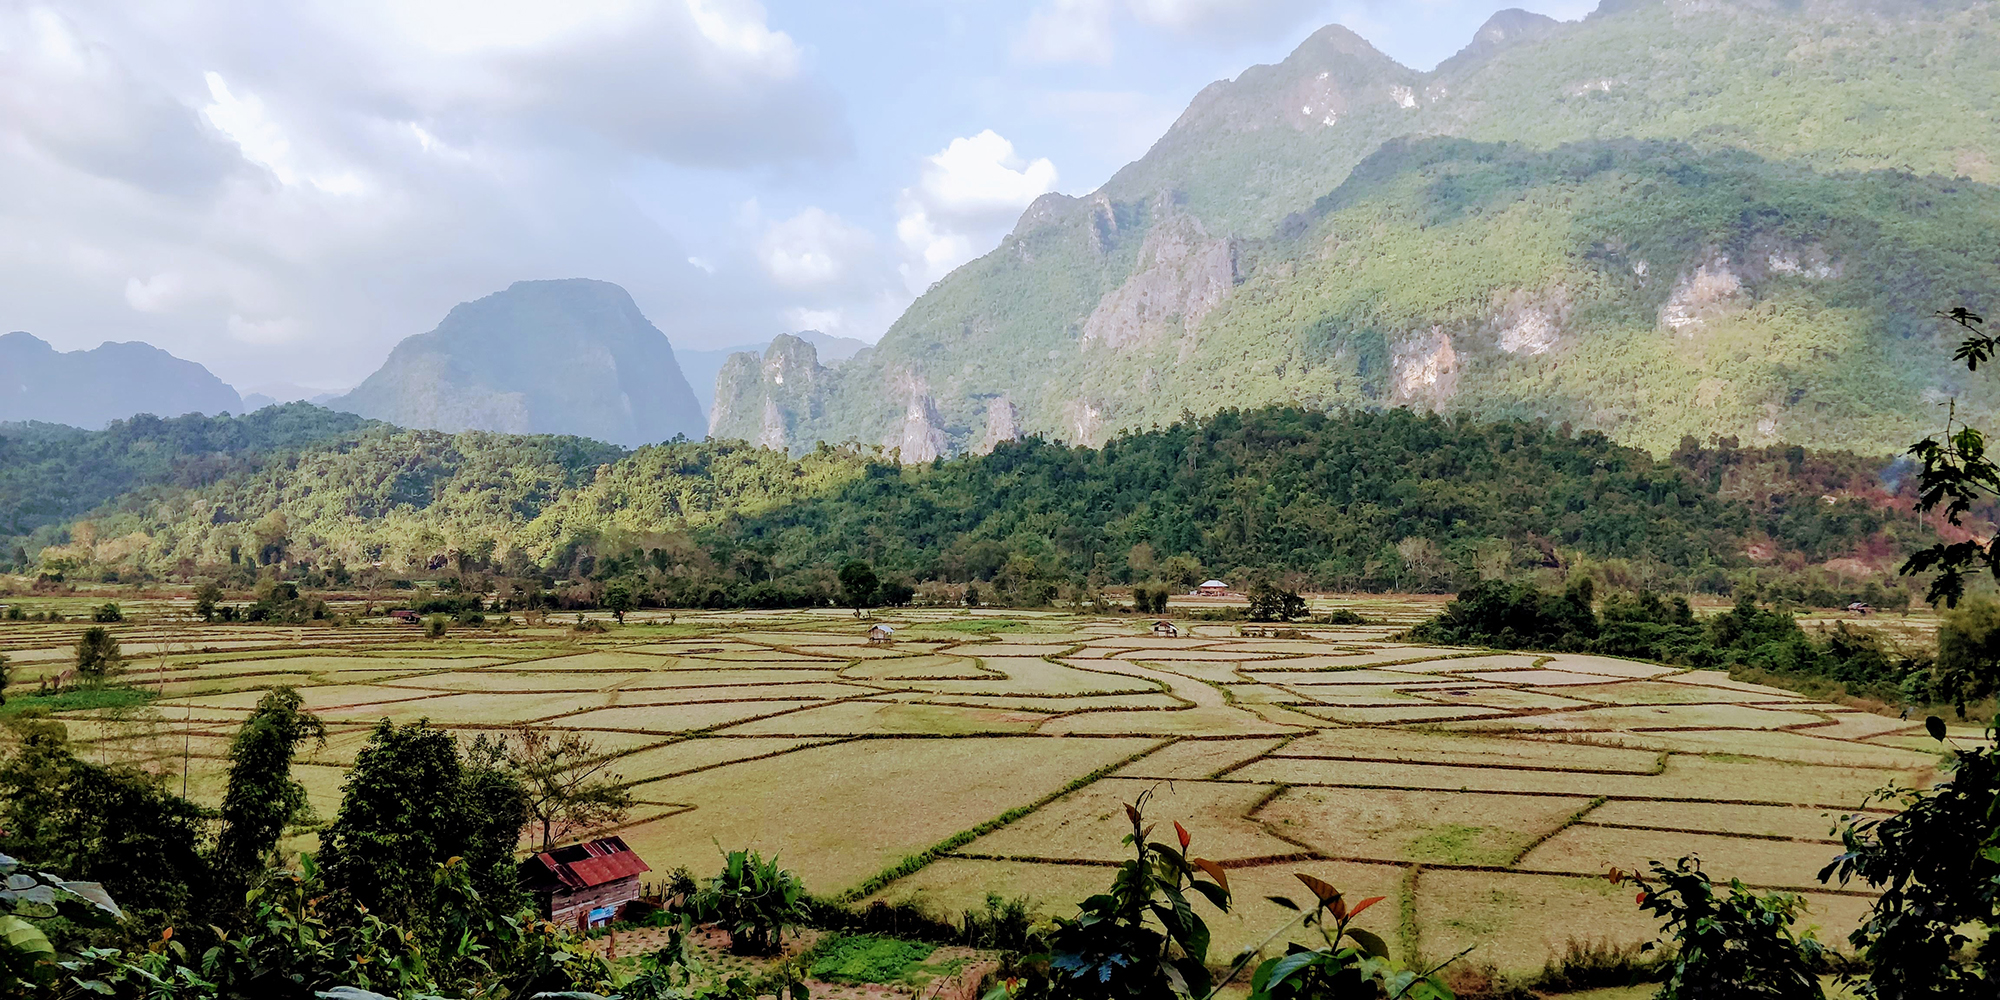 Will you pray for the people of Laos?